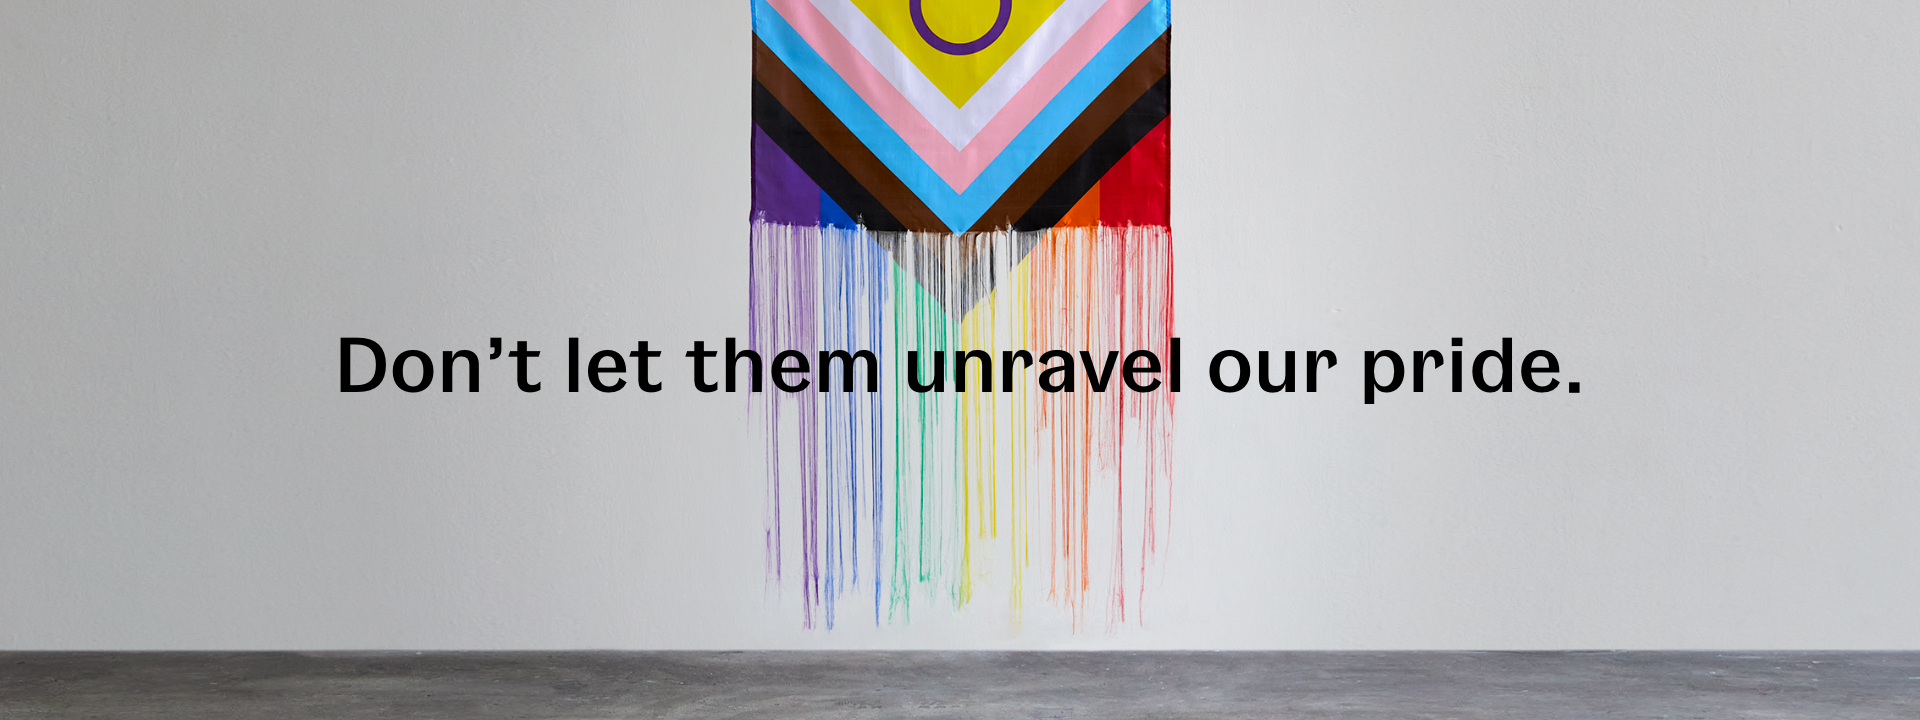 Don't let them unravel our pride. (Progress pride flag hanging vertically with threads unravelling.